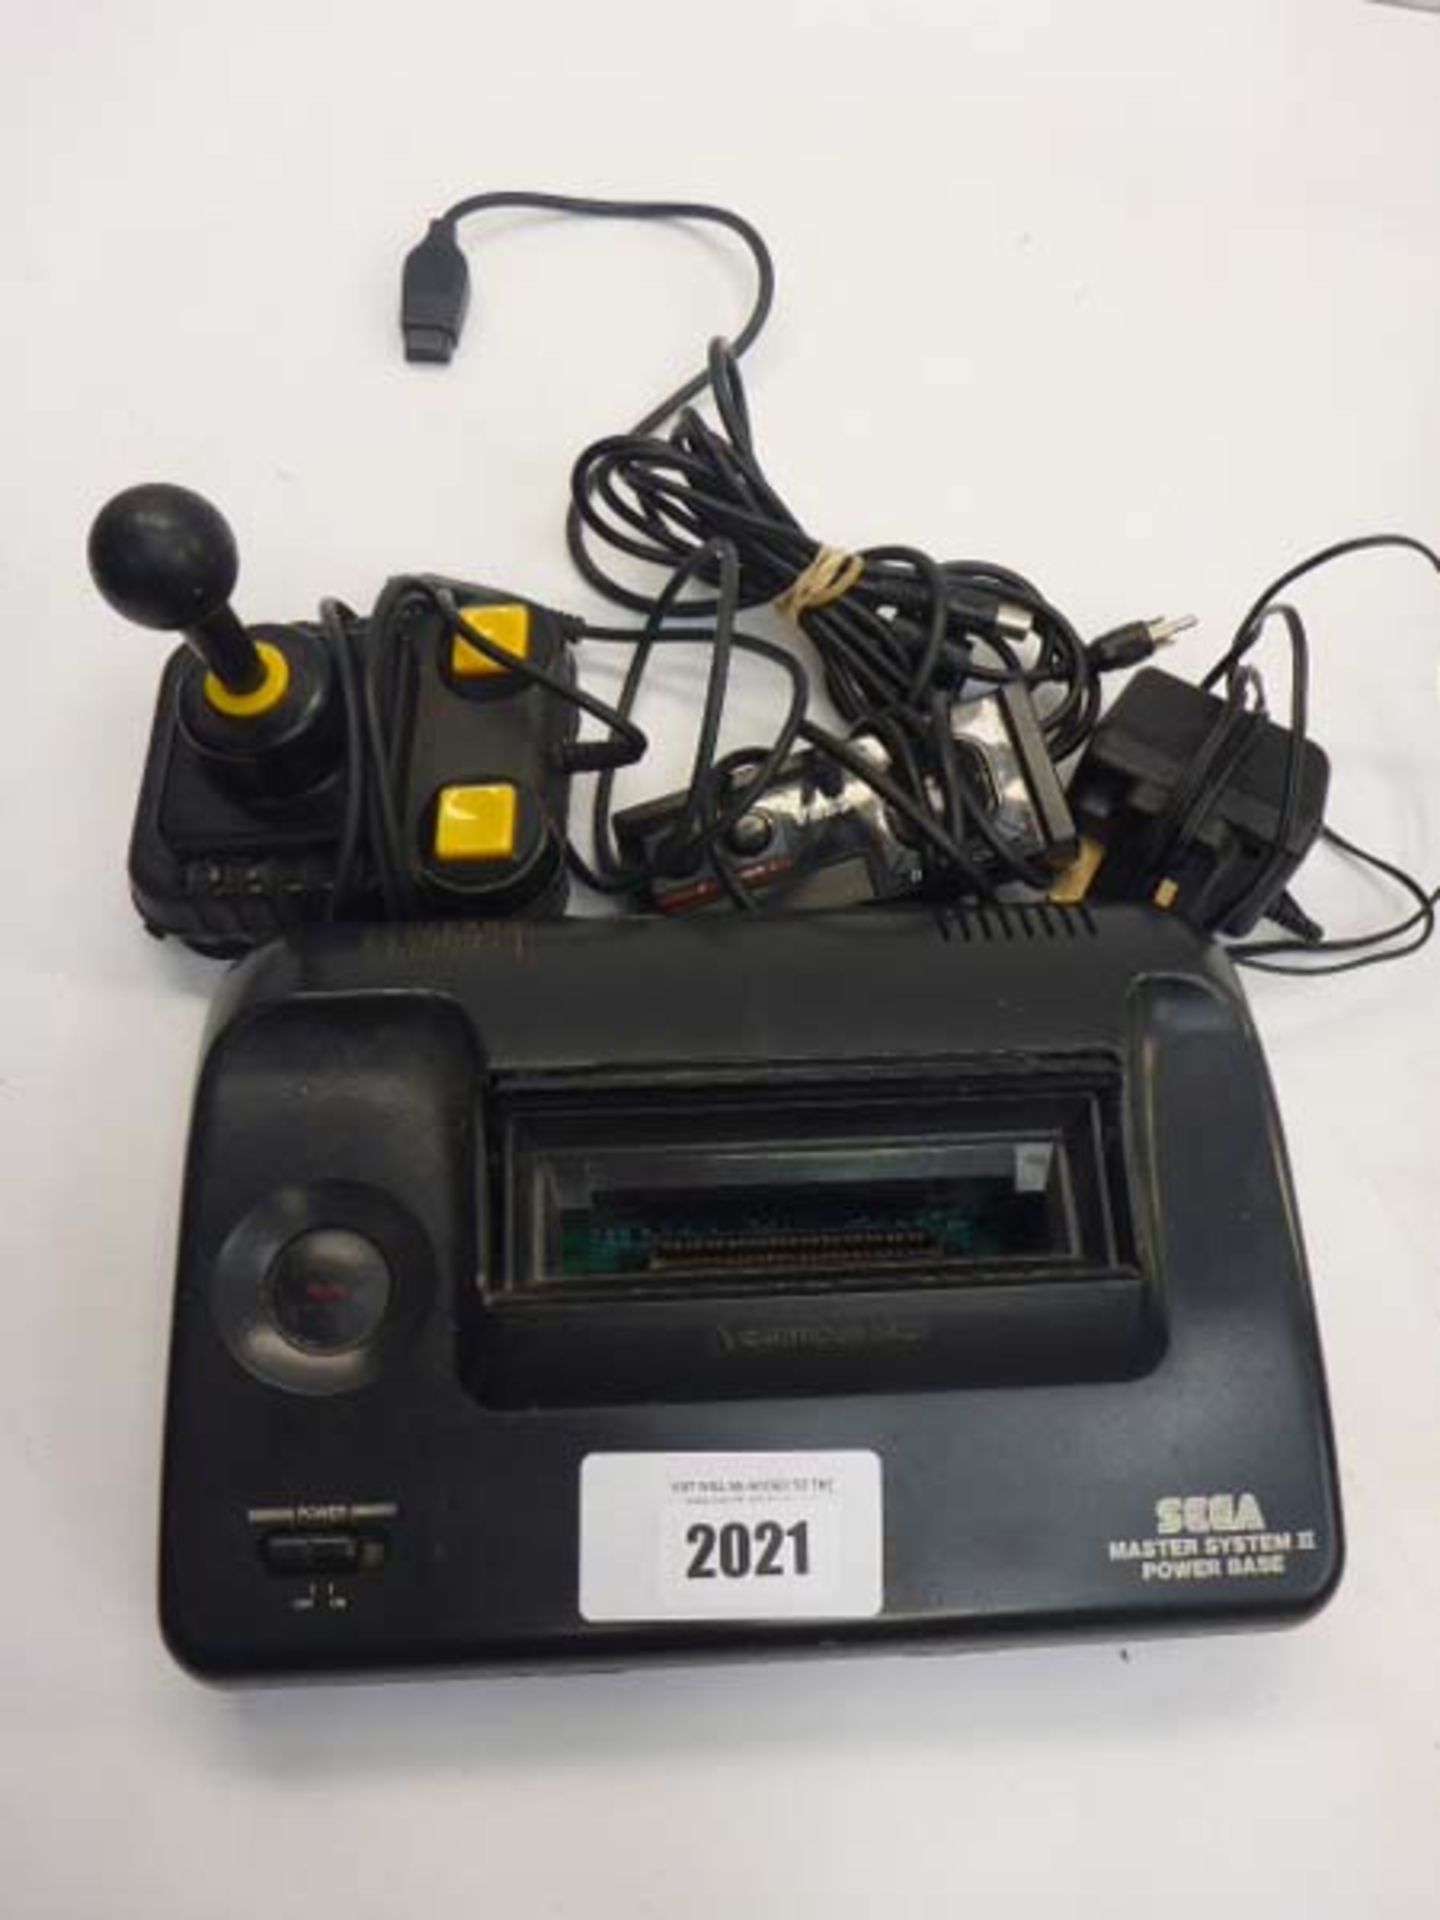 Sega Master System II power base with control, joystick and AD adapter